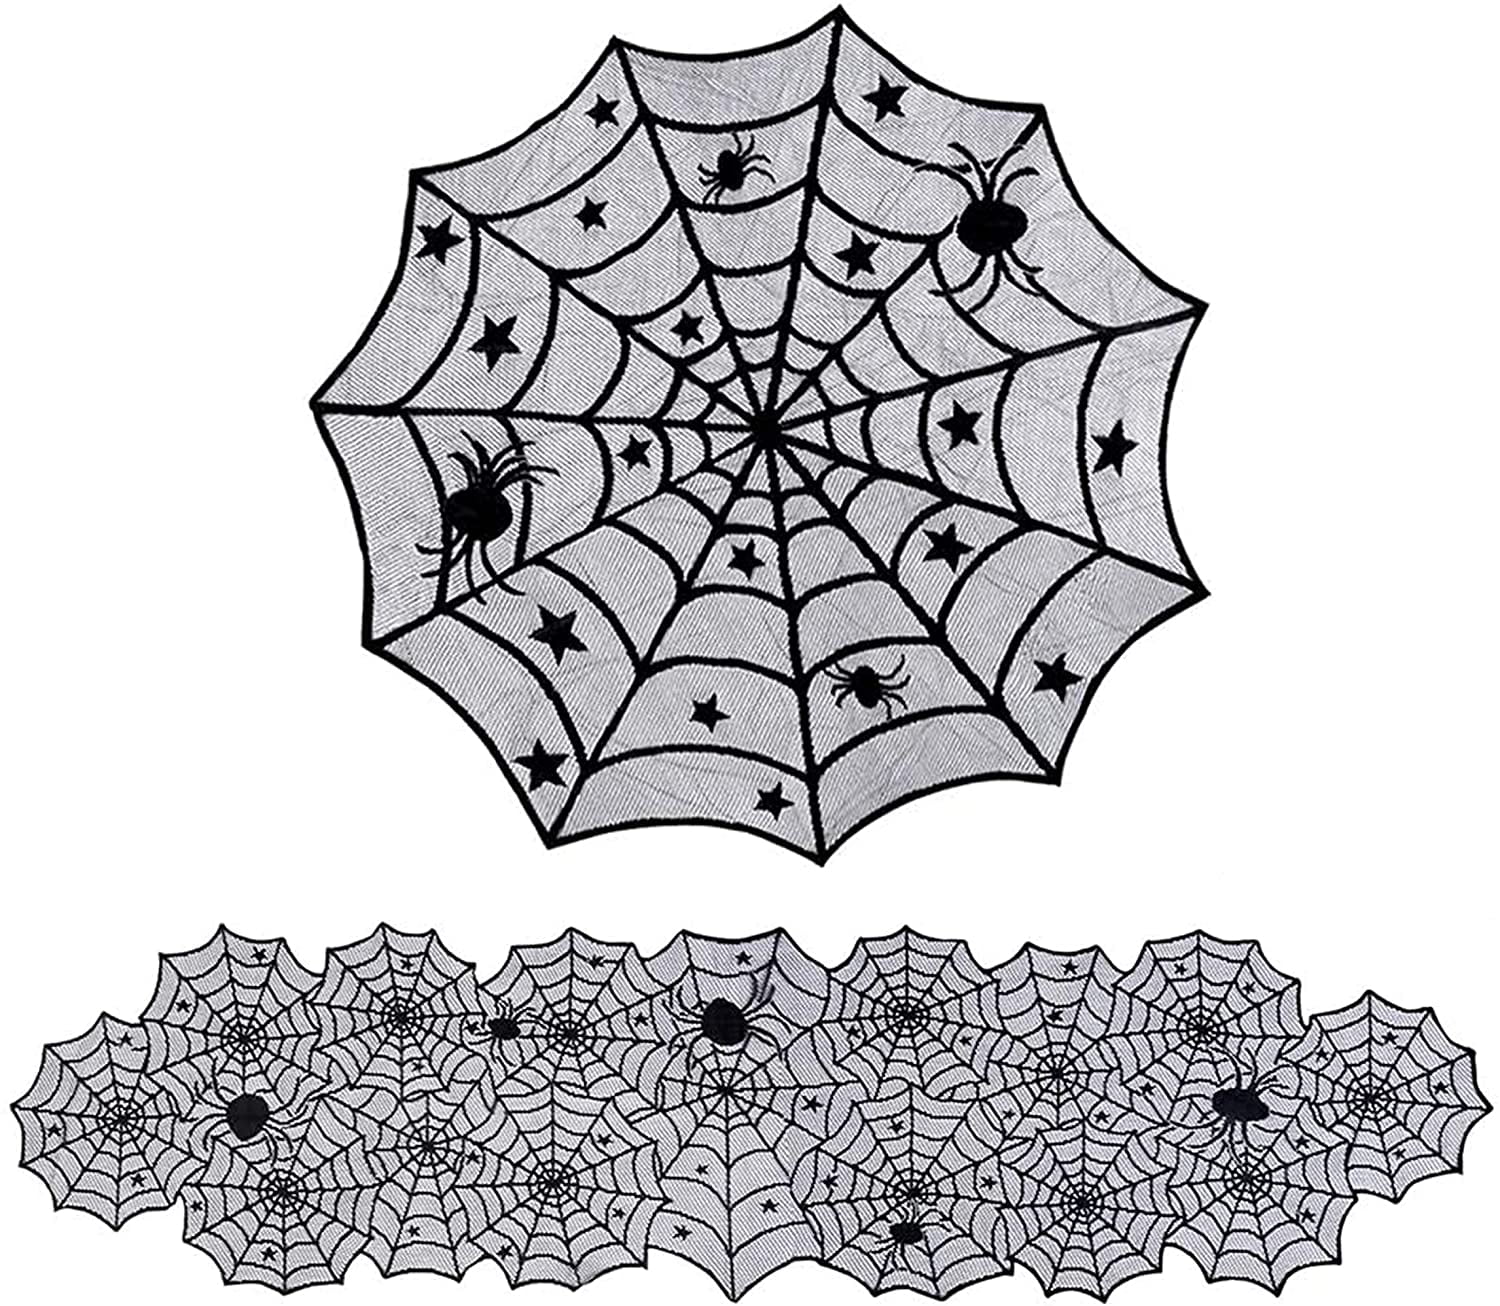 Halloween Lace Tablecloth Spider Web Table Runner Party Holiday Home Decor Black 